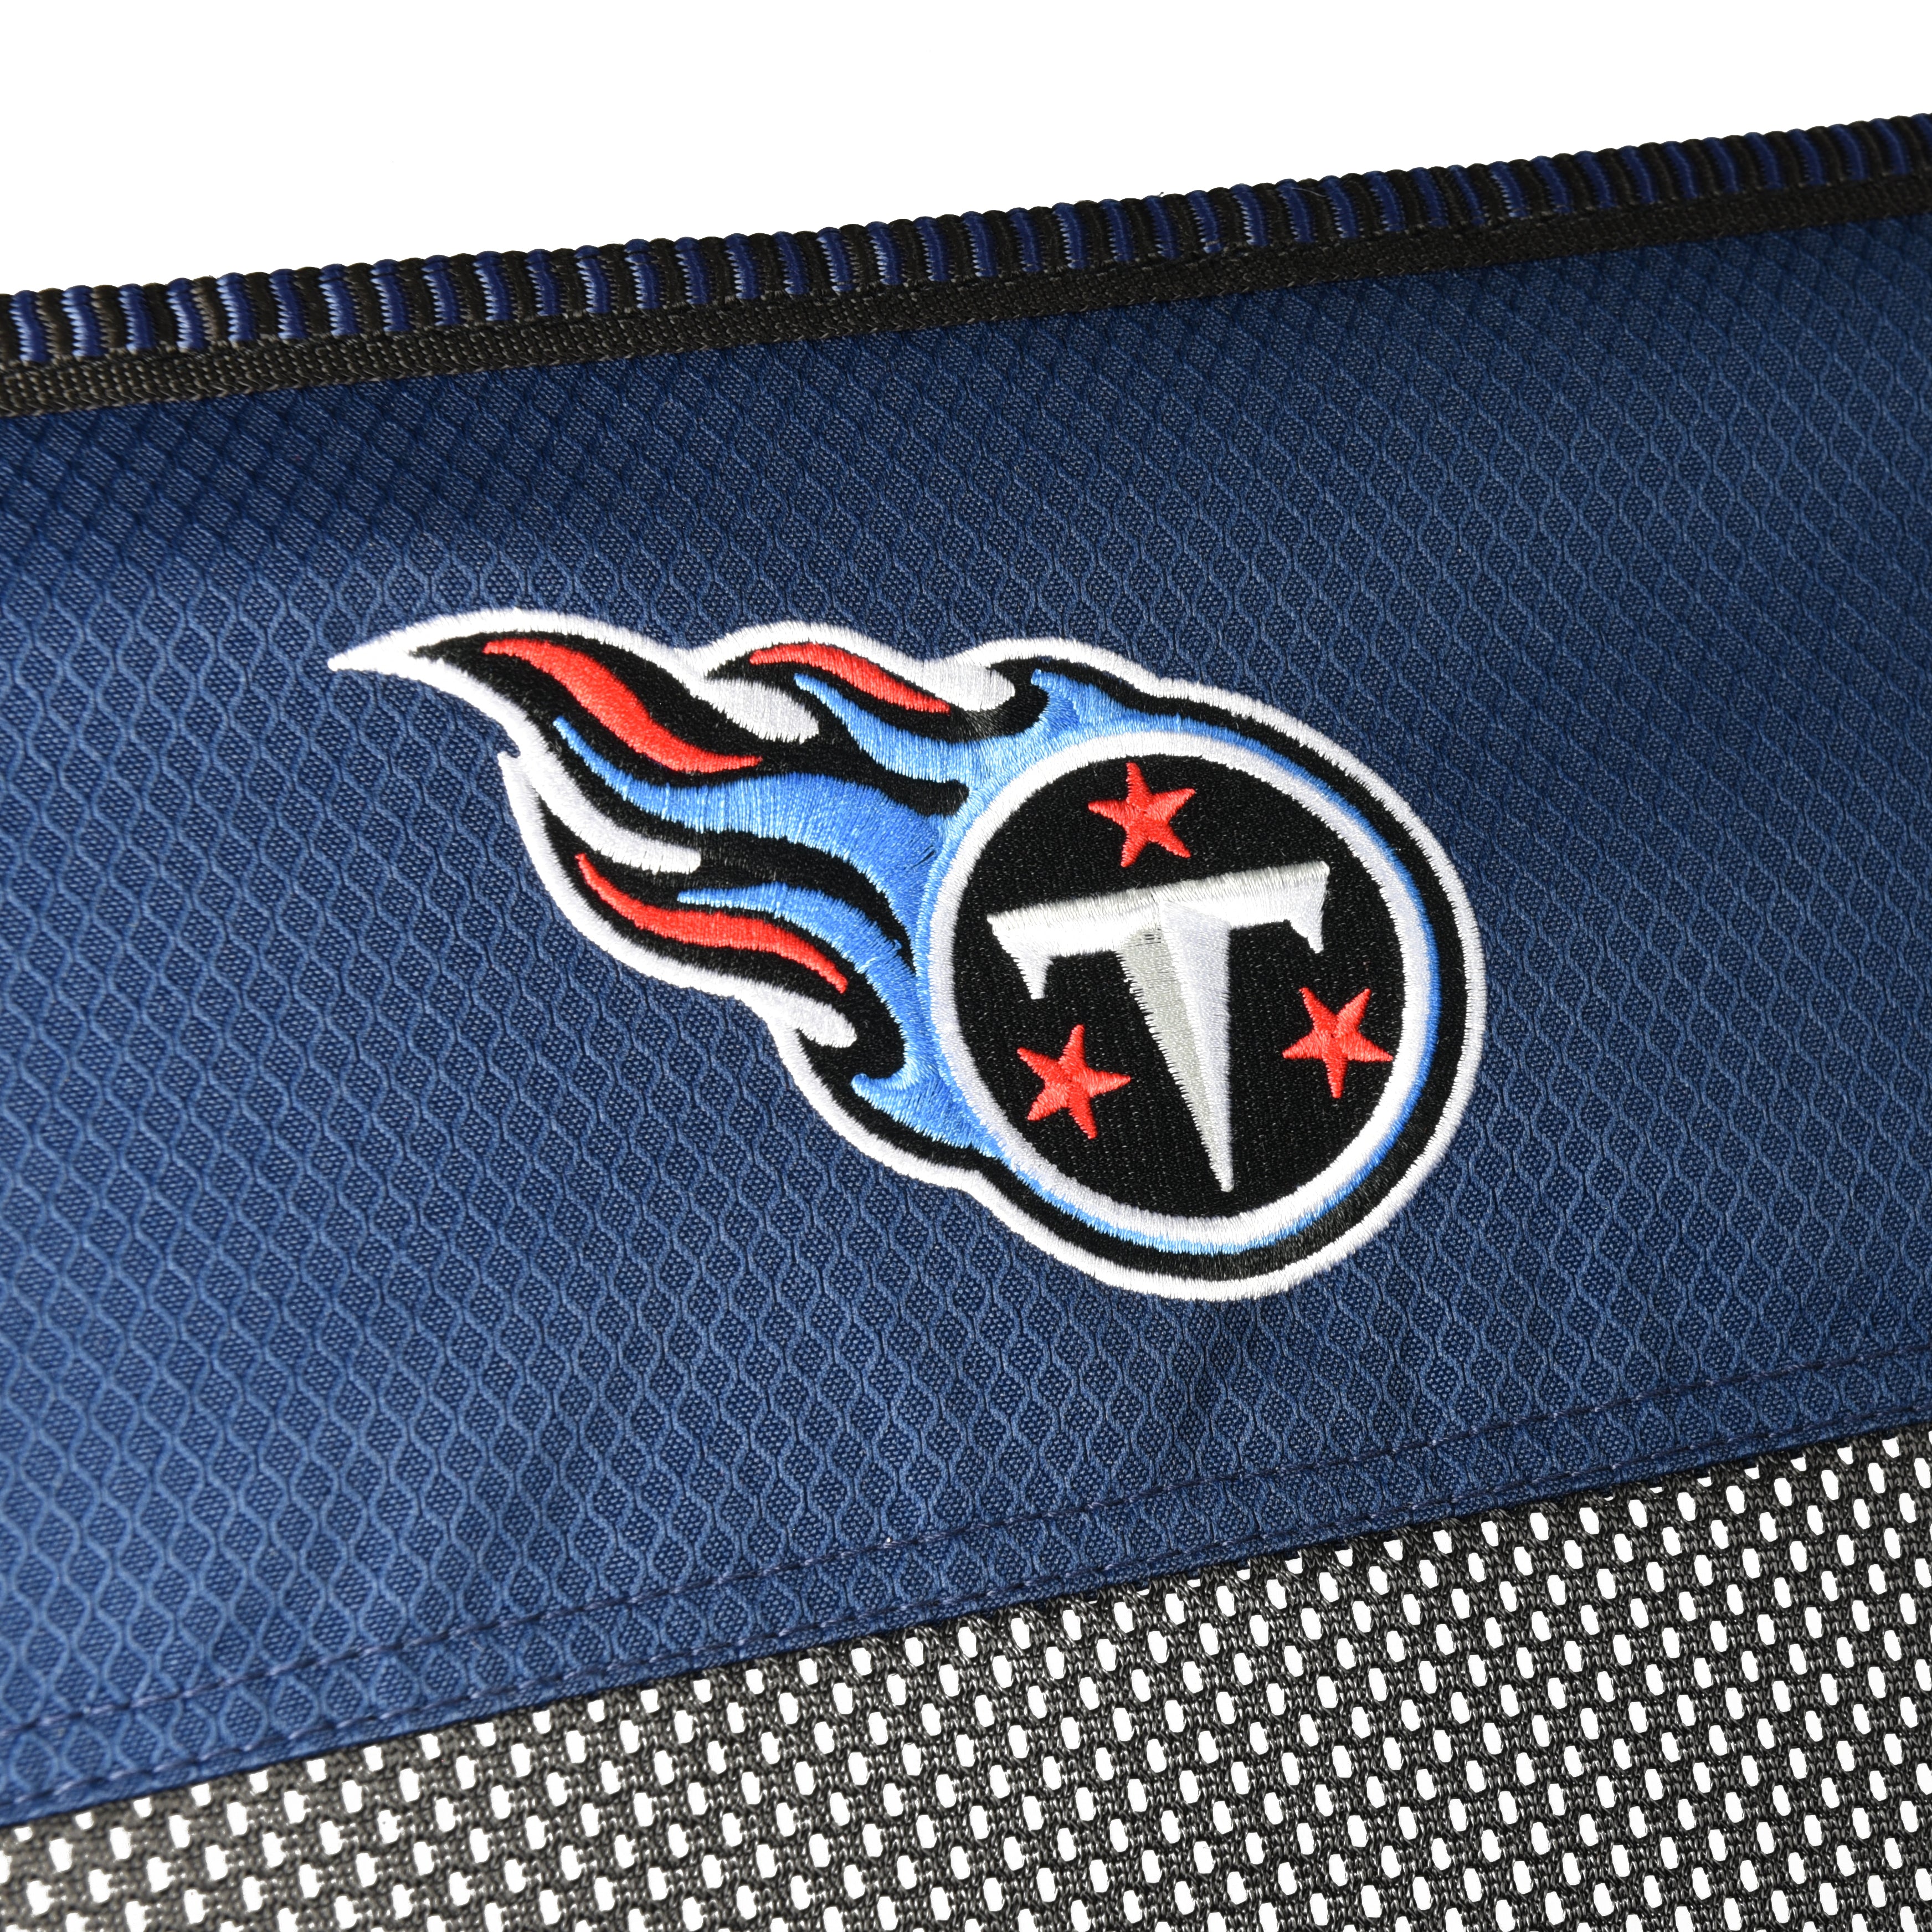 Tennessee Titans Dual Lock Pro Chair